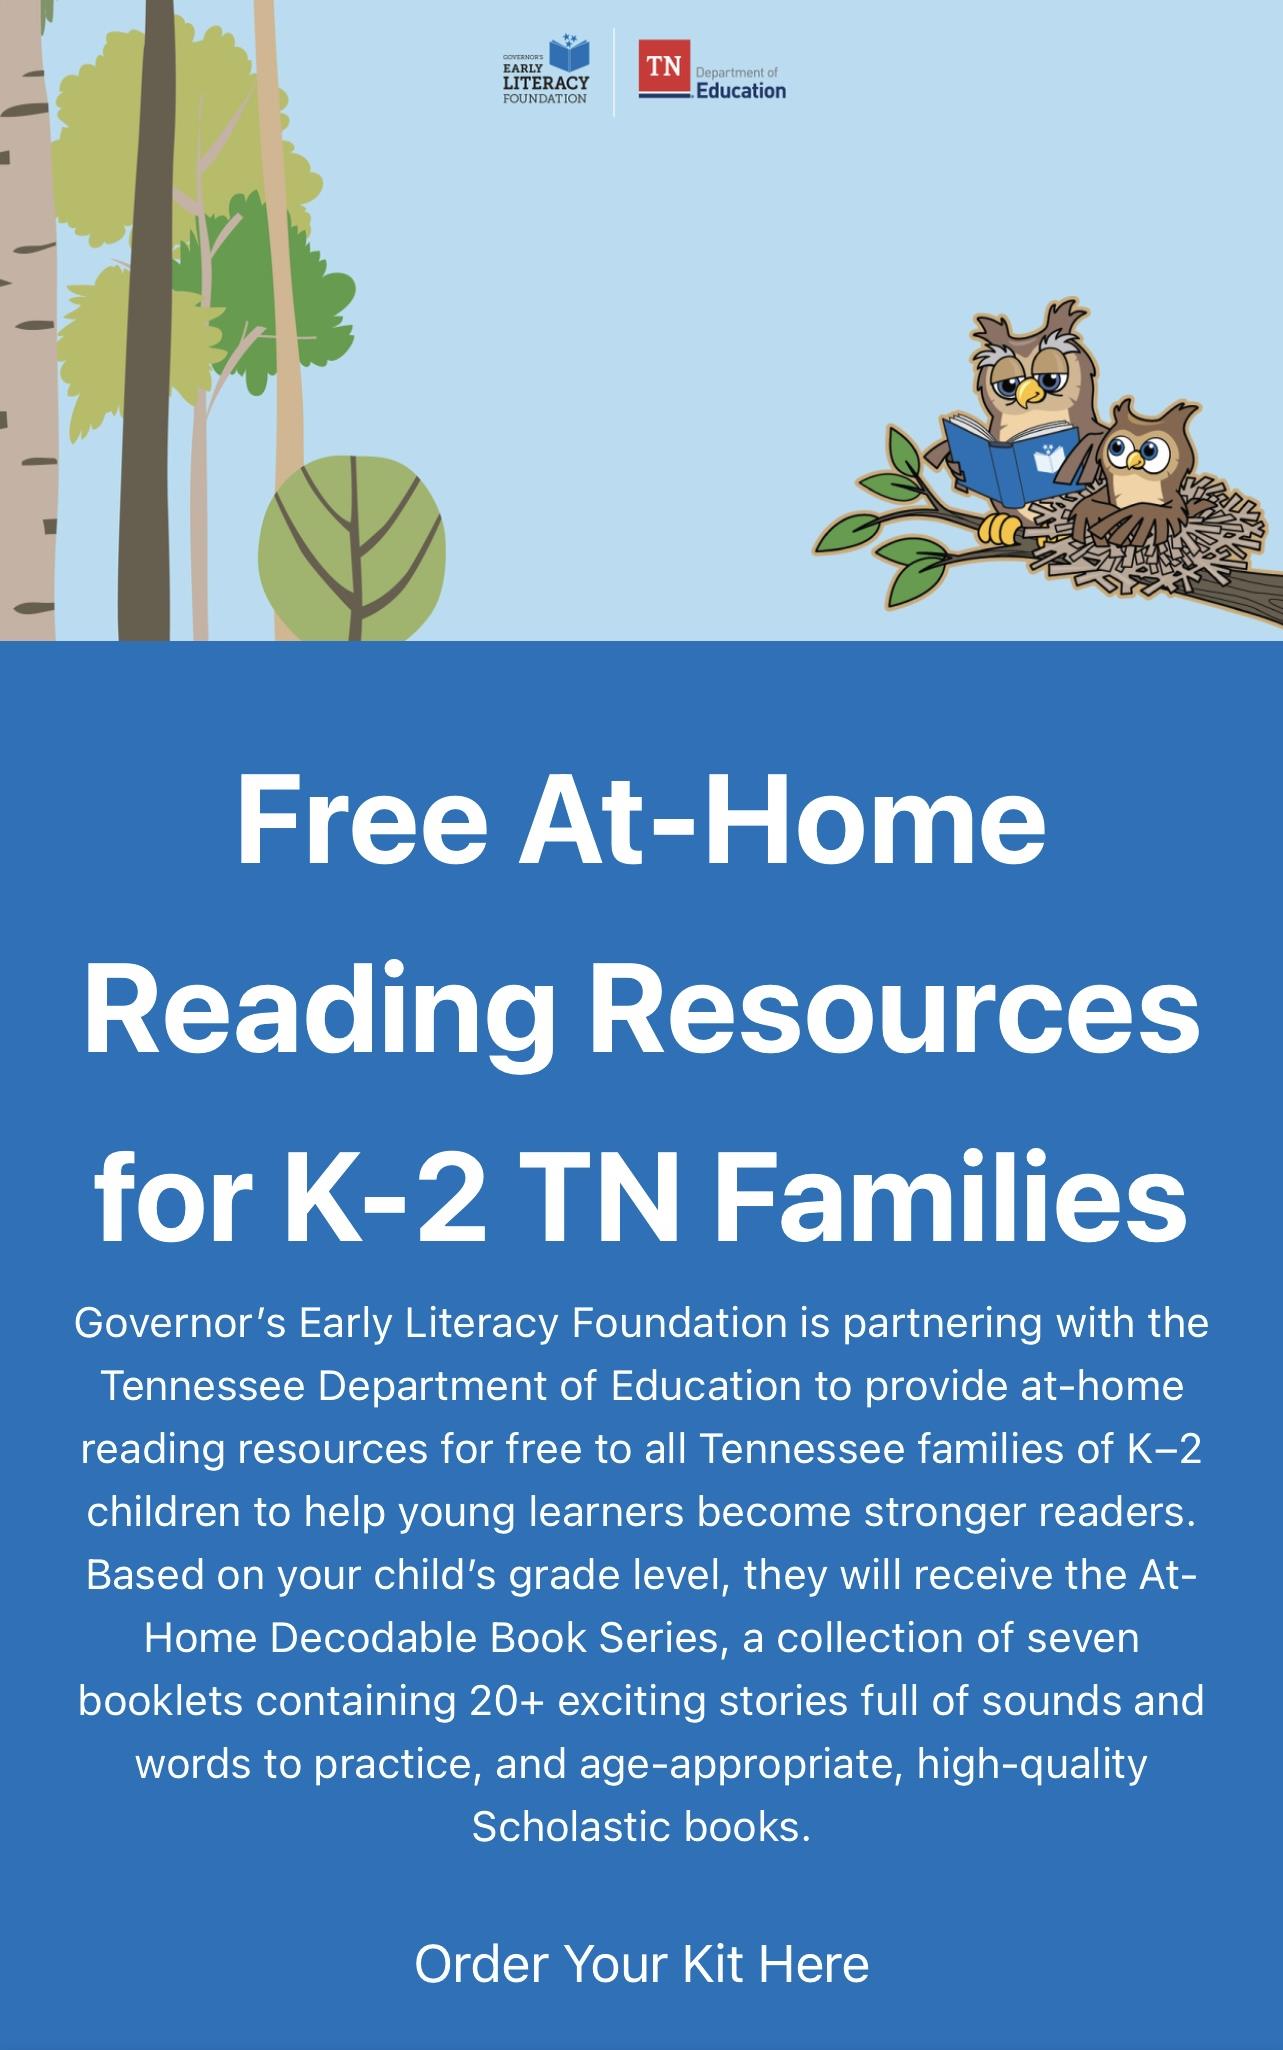 Free at home reading resources for K-2 TN Families - Link - please click to visit site